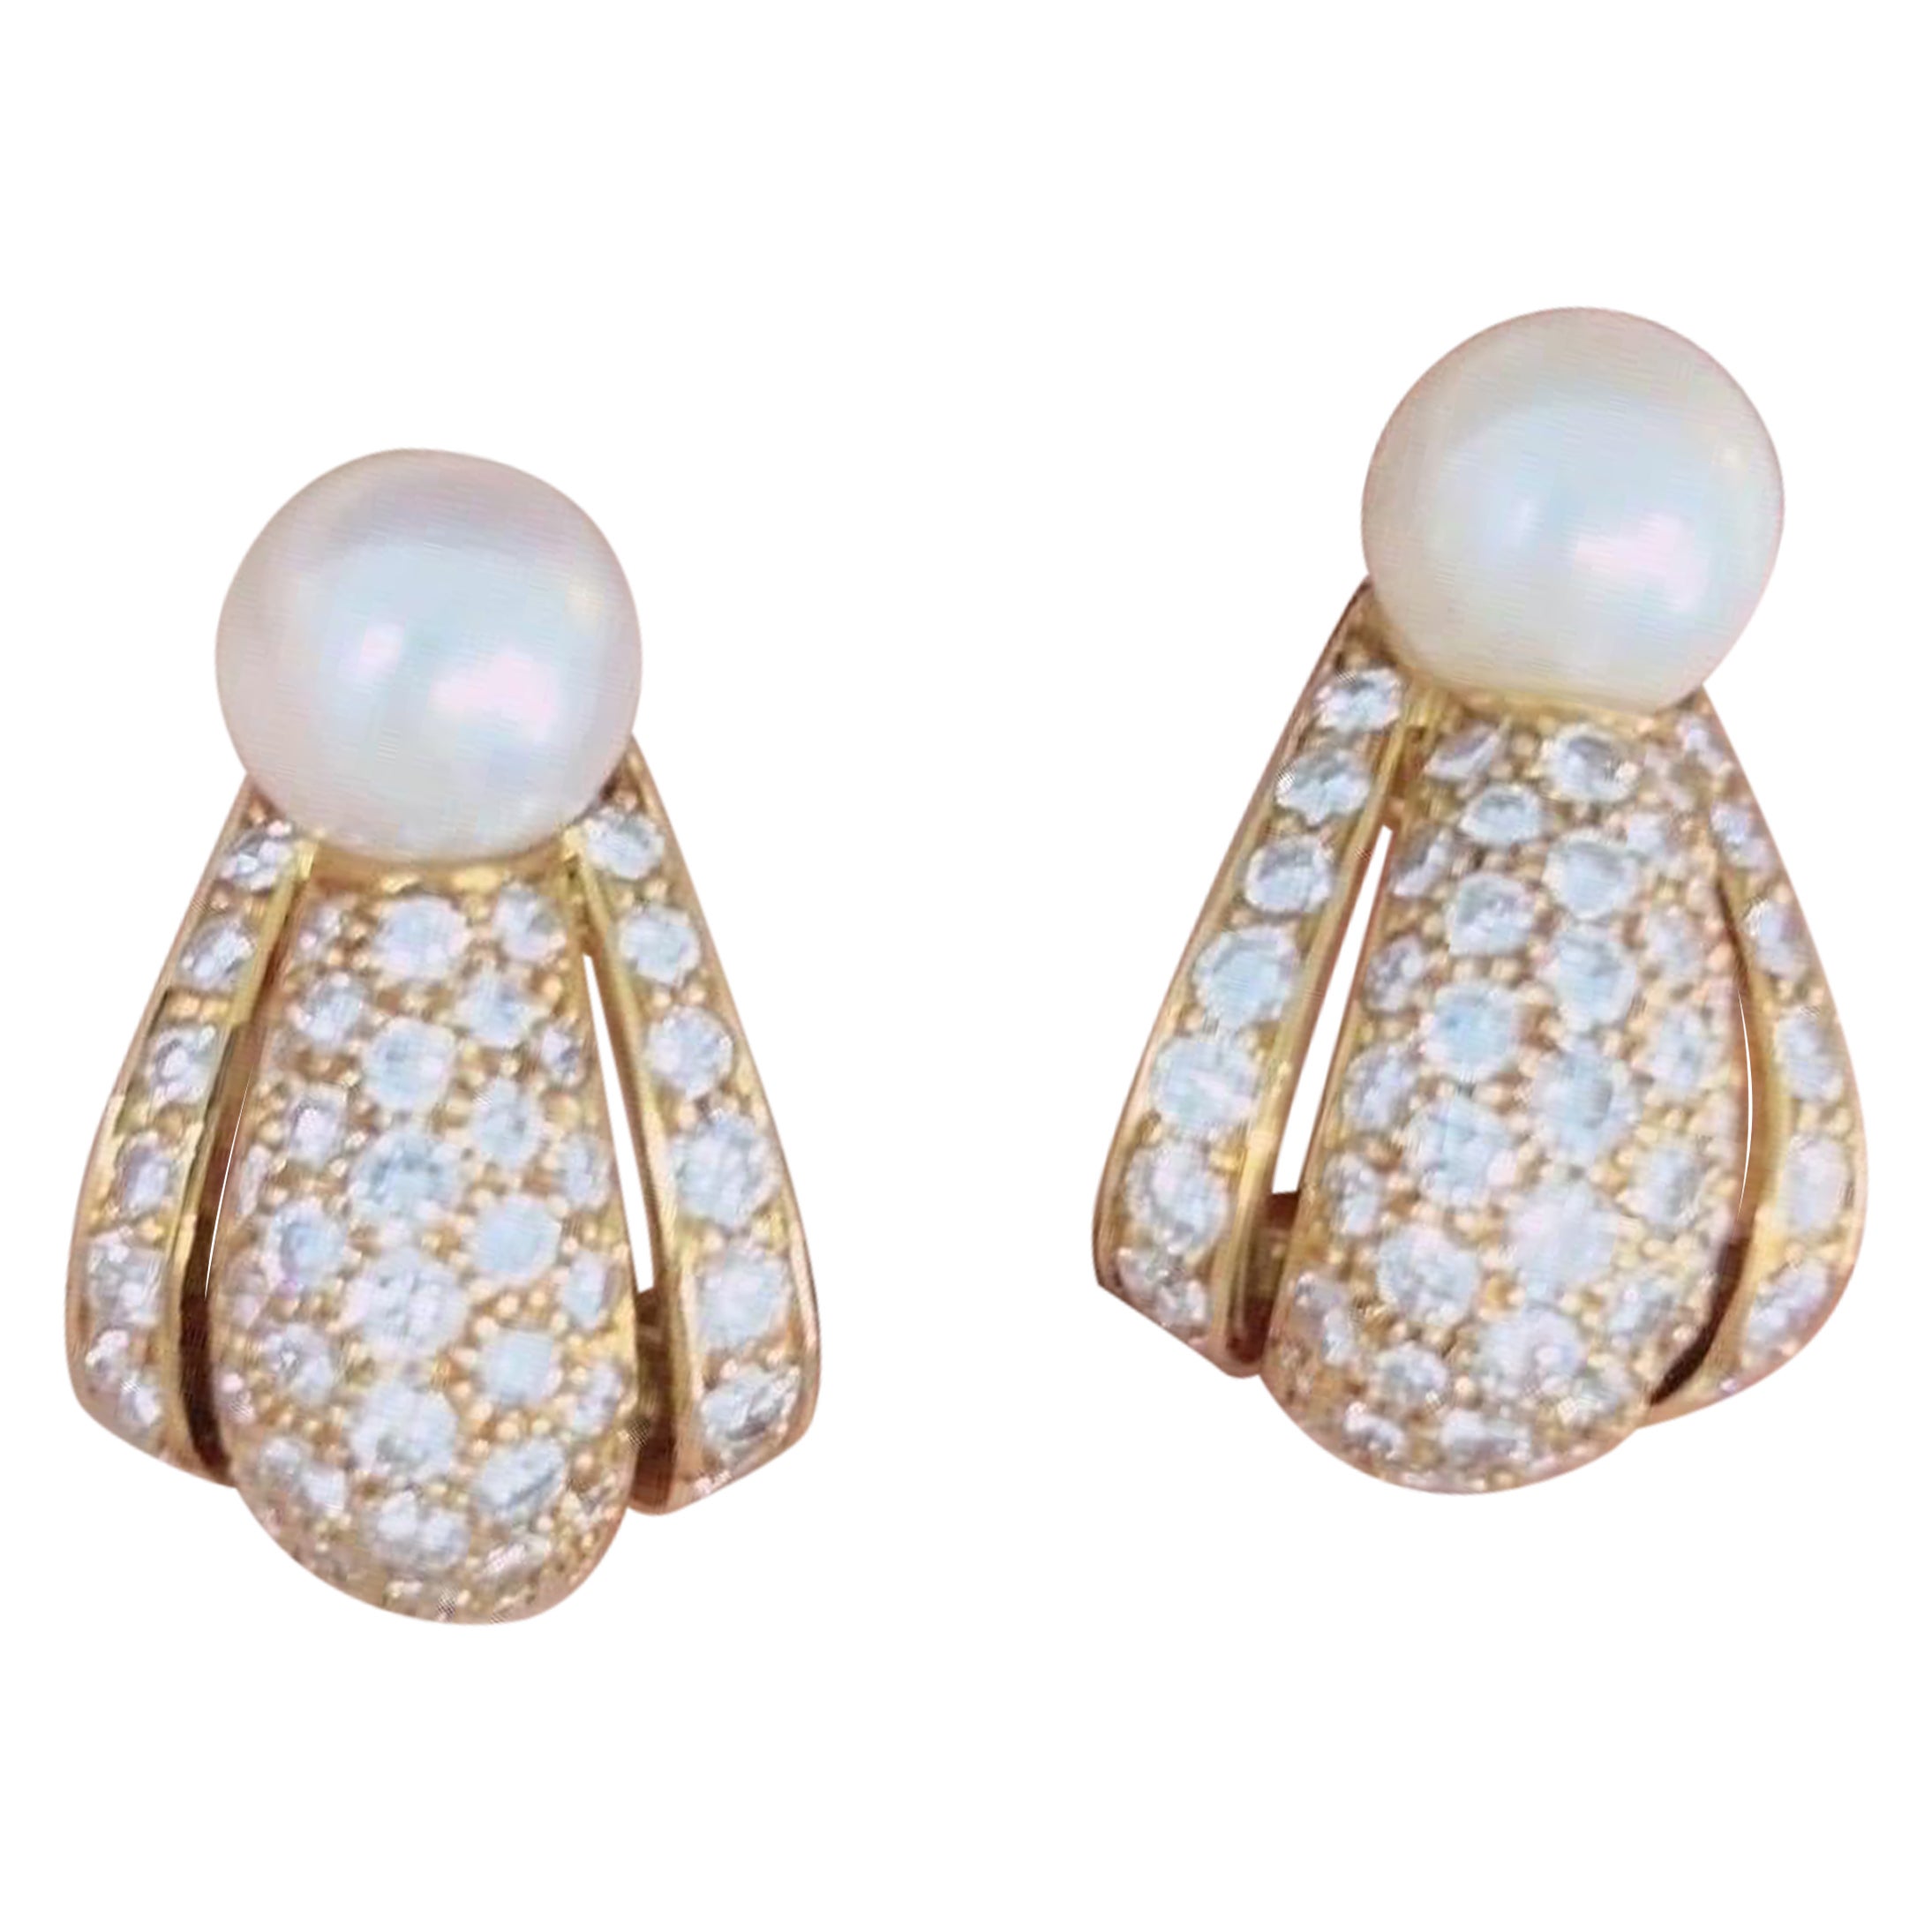 Cartier, a pair of diamond and cultured pearl ear clips